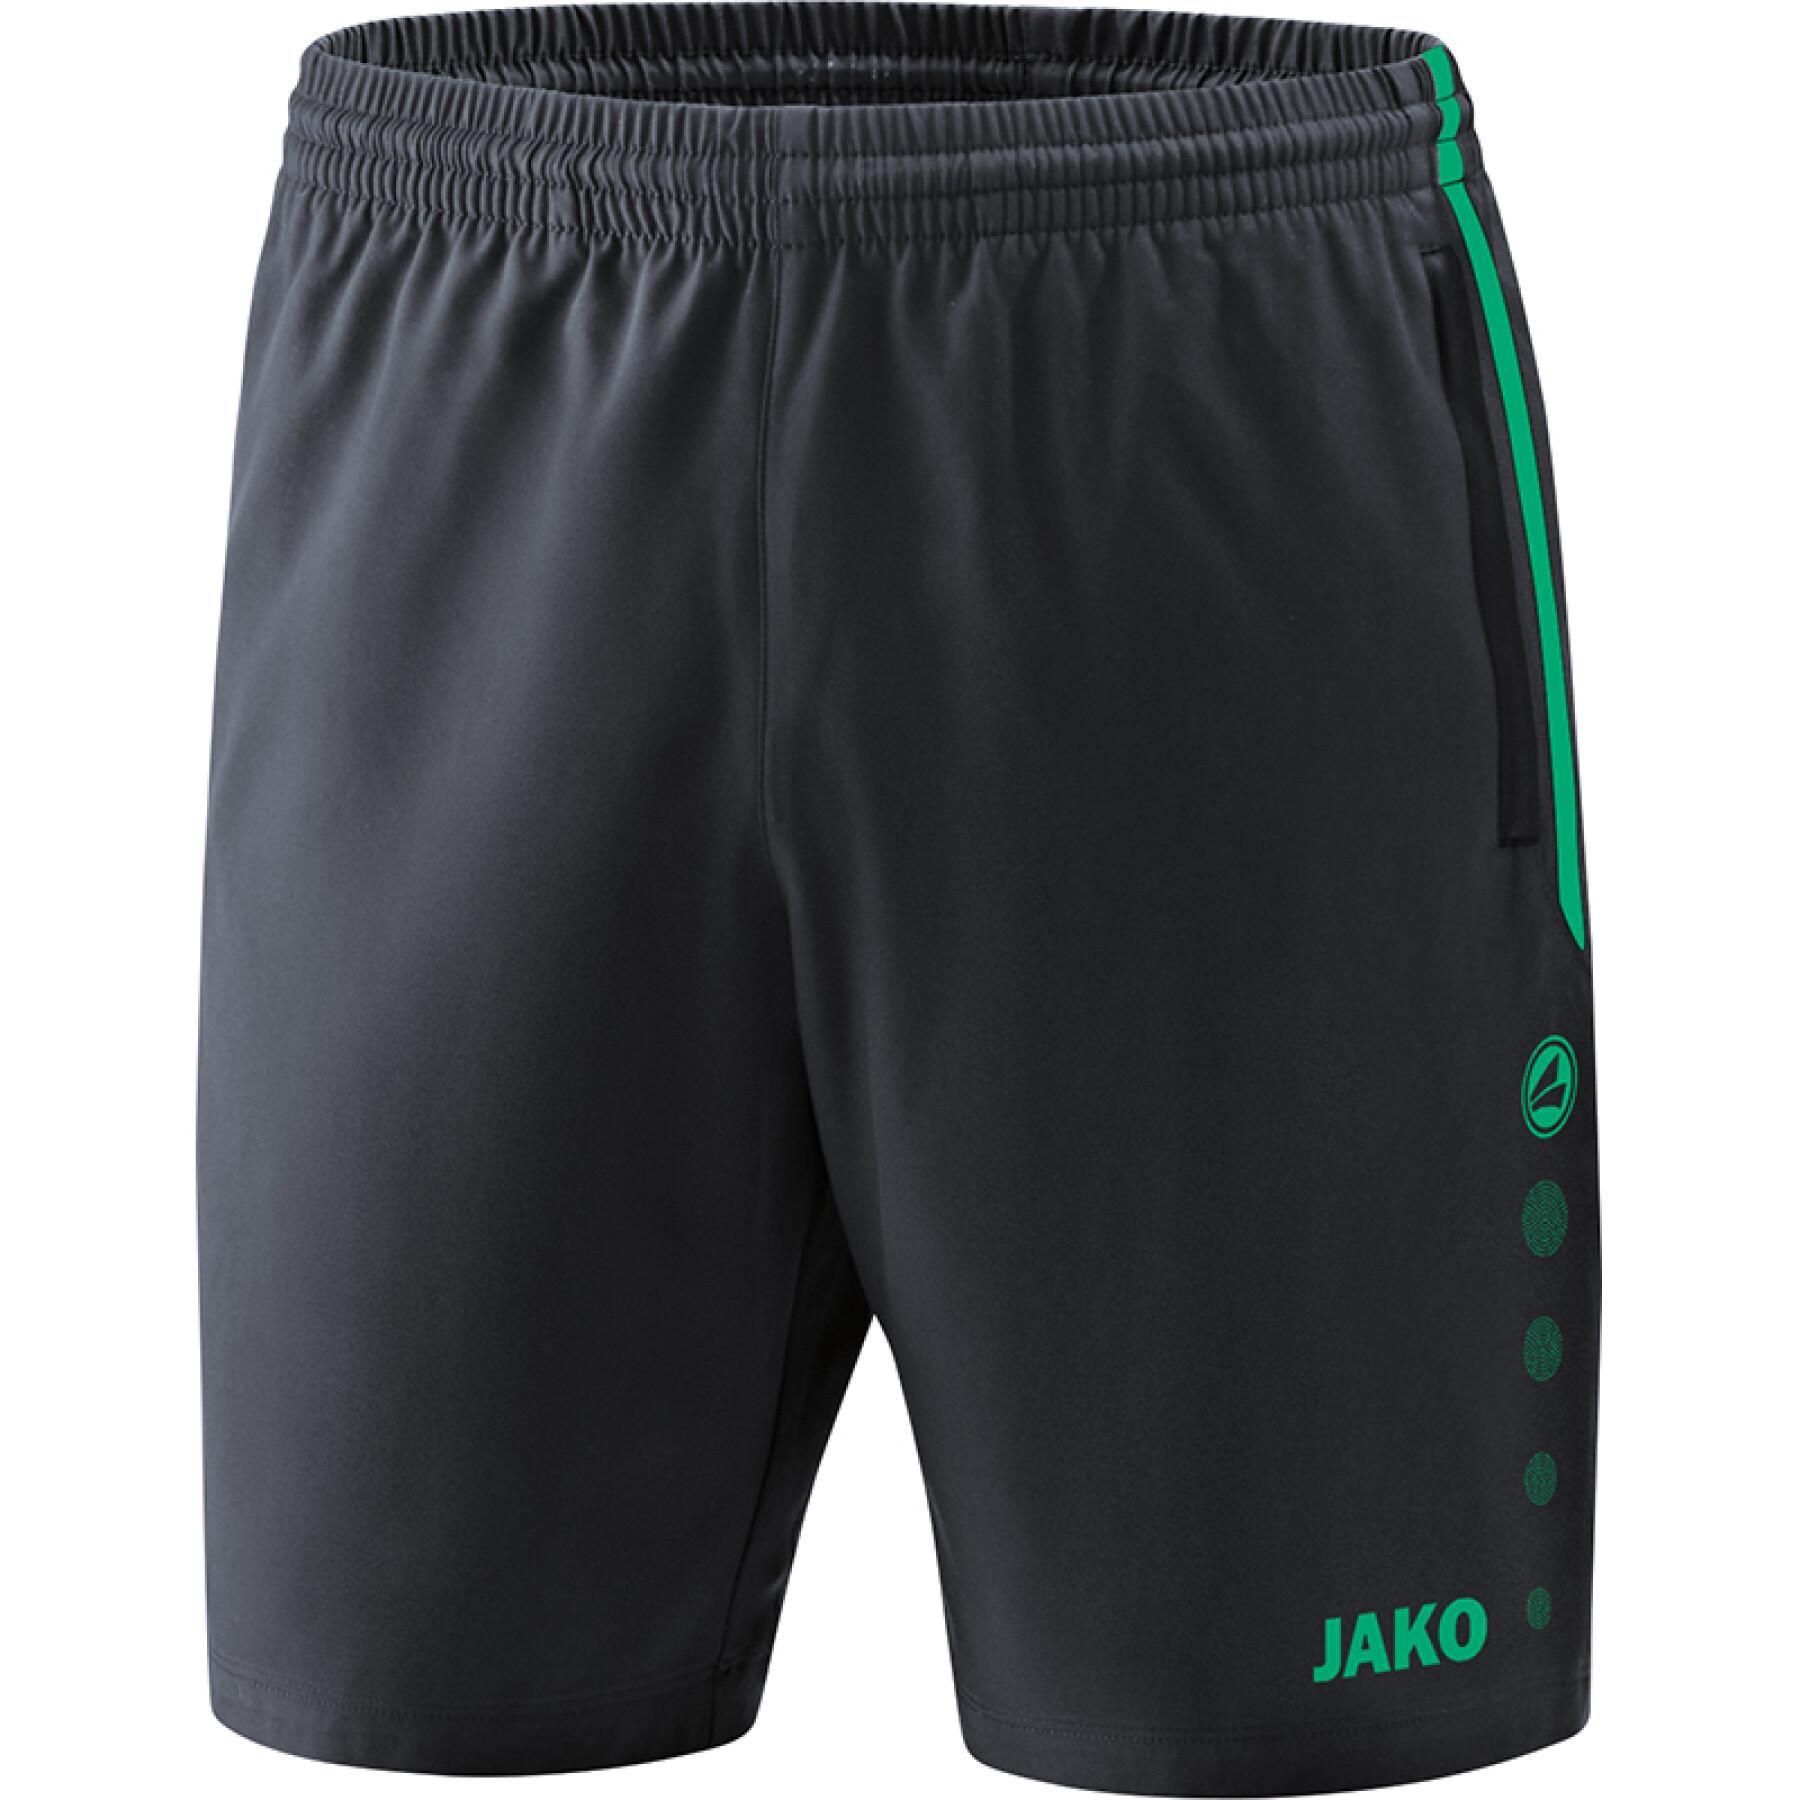 Women's shorts Jako Competition 2.0